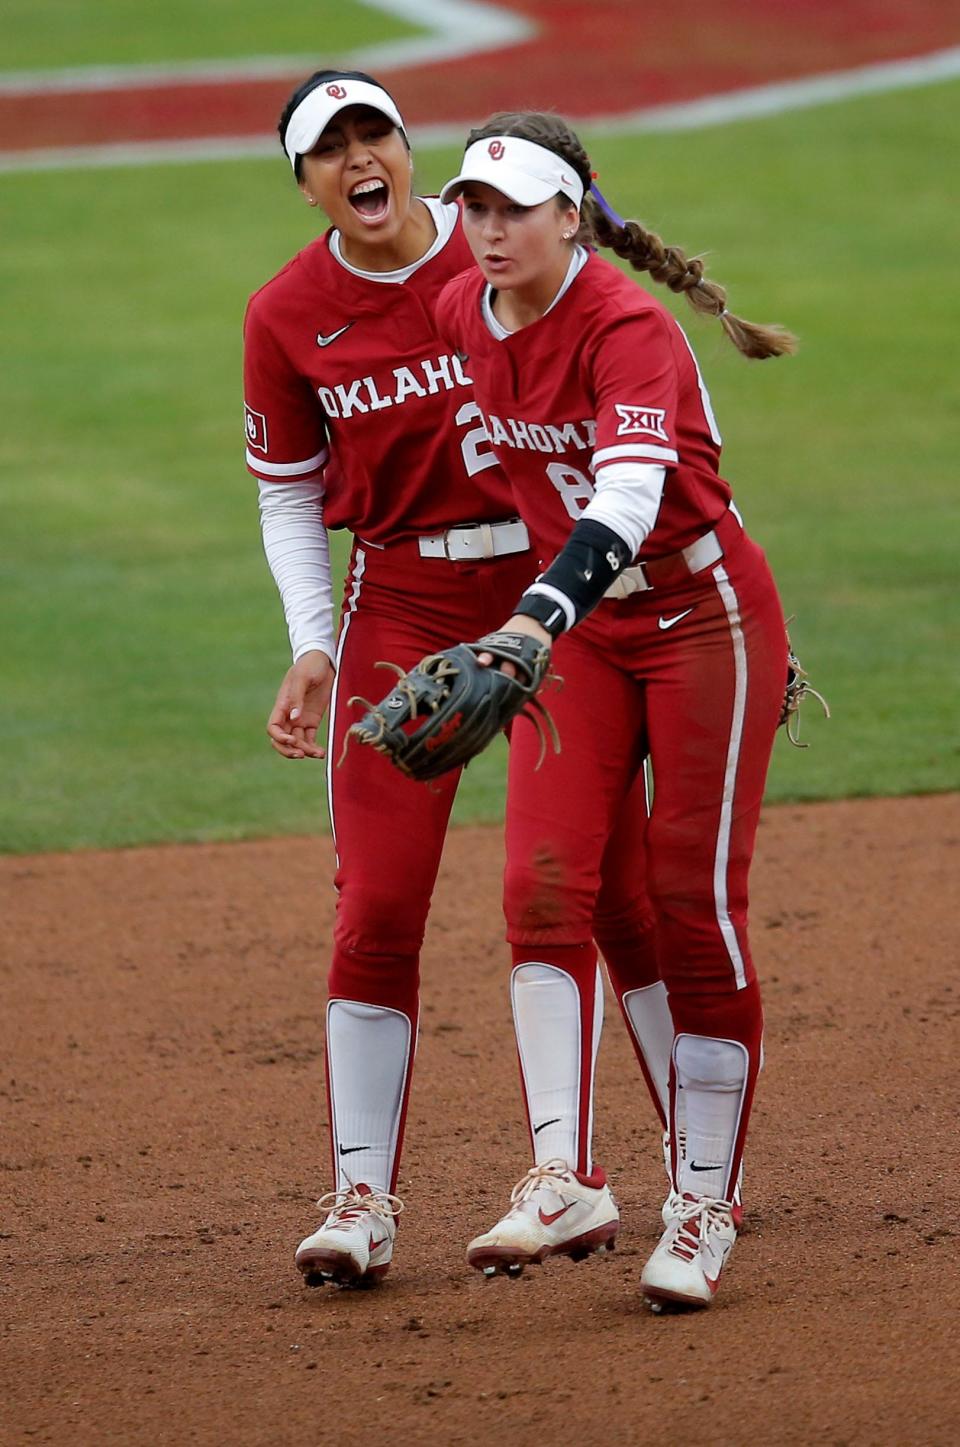 OU's Avery Hodge (82) celebrates an out with Tiare Jennings (23) in the first inning against Houston on April 20 at Love's Field in Norman.